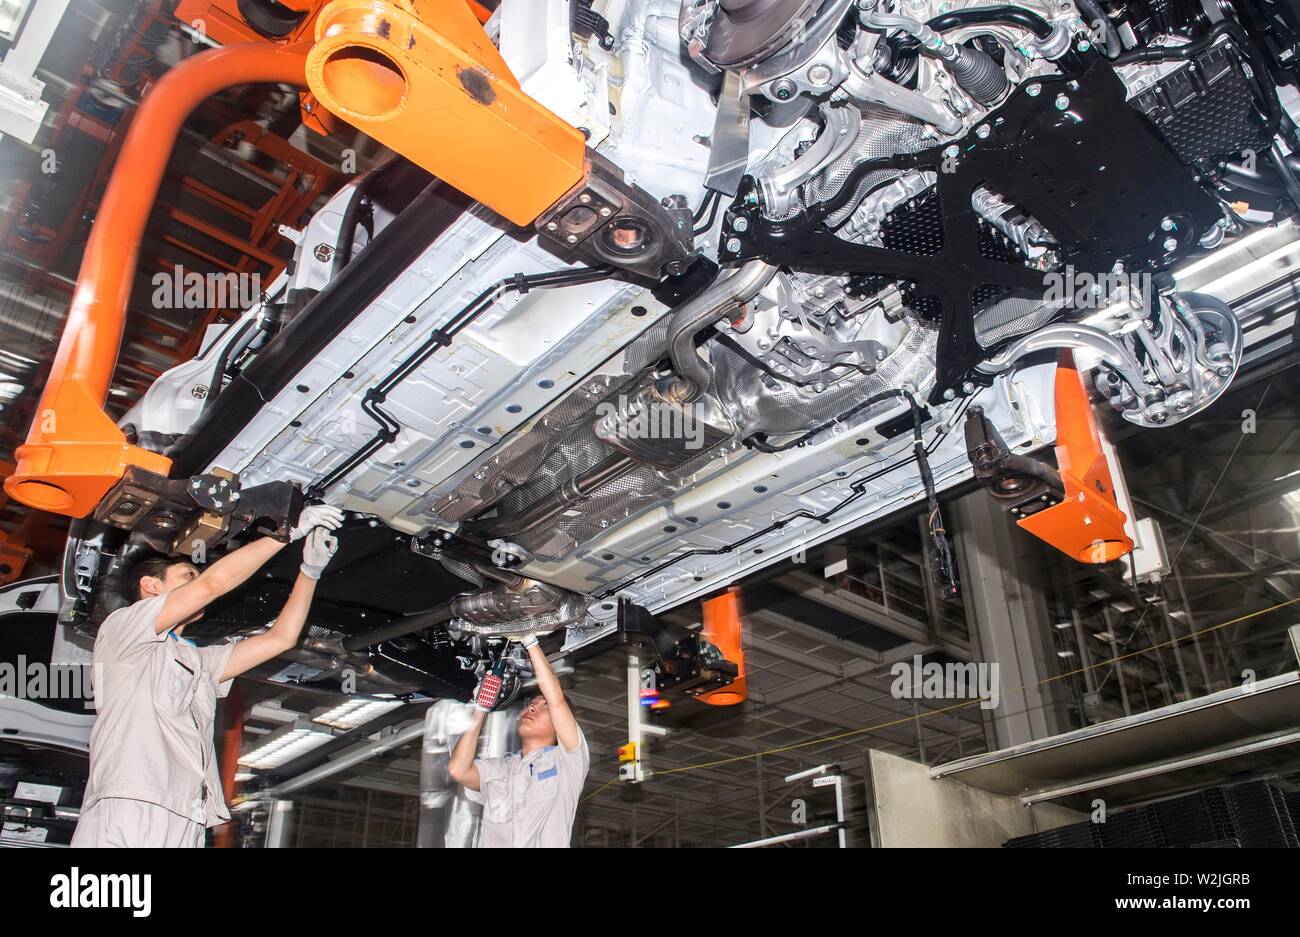 Changchun, China's Jilin Province. 9th July, 2019. Workers assemble an Audi vehicle at FAW-Volkswagen factory in Changchun, northeast China's Jilin Province, July 9, 2019. The Sino-German auto joint venture FAW-Volkswagen said a record 311,871 Audi vehicles were sold in China in the first half of 2019, up 2.1 percent year-on-year. Credit: Xu Chang/Xinhua/Alamy Live News Stock Photo